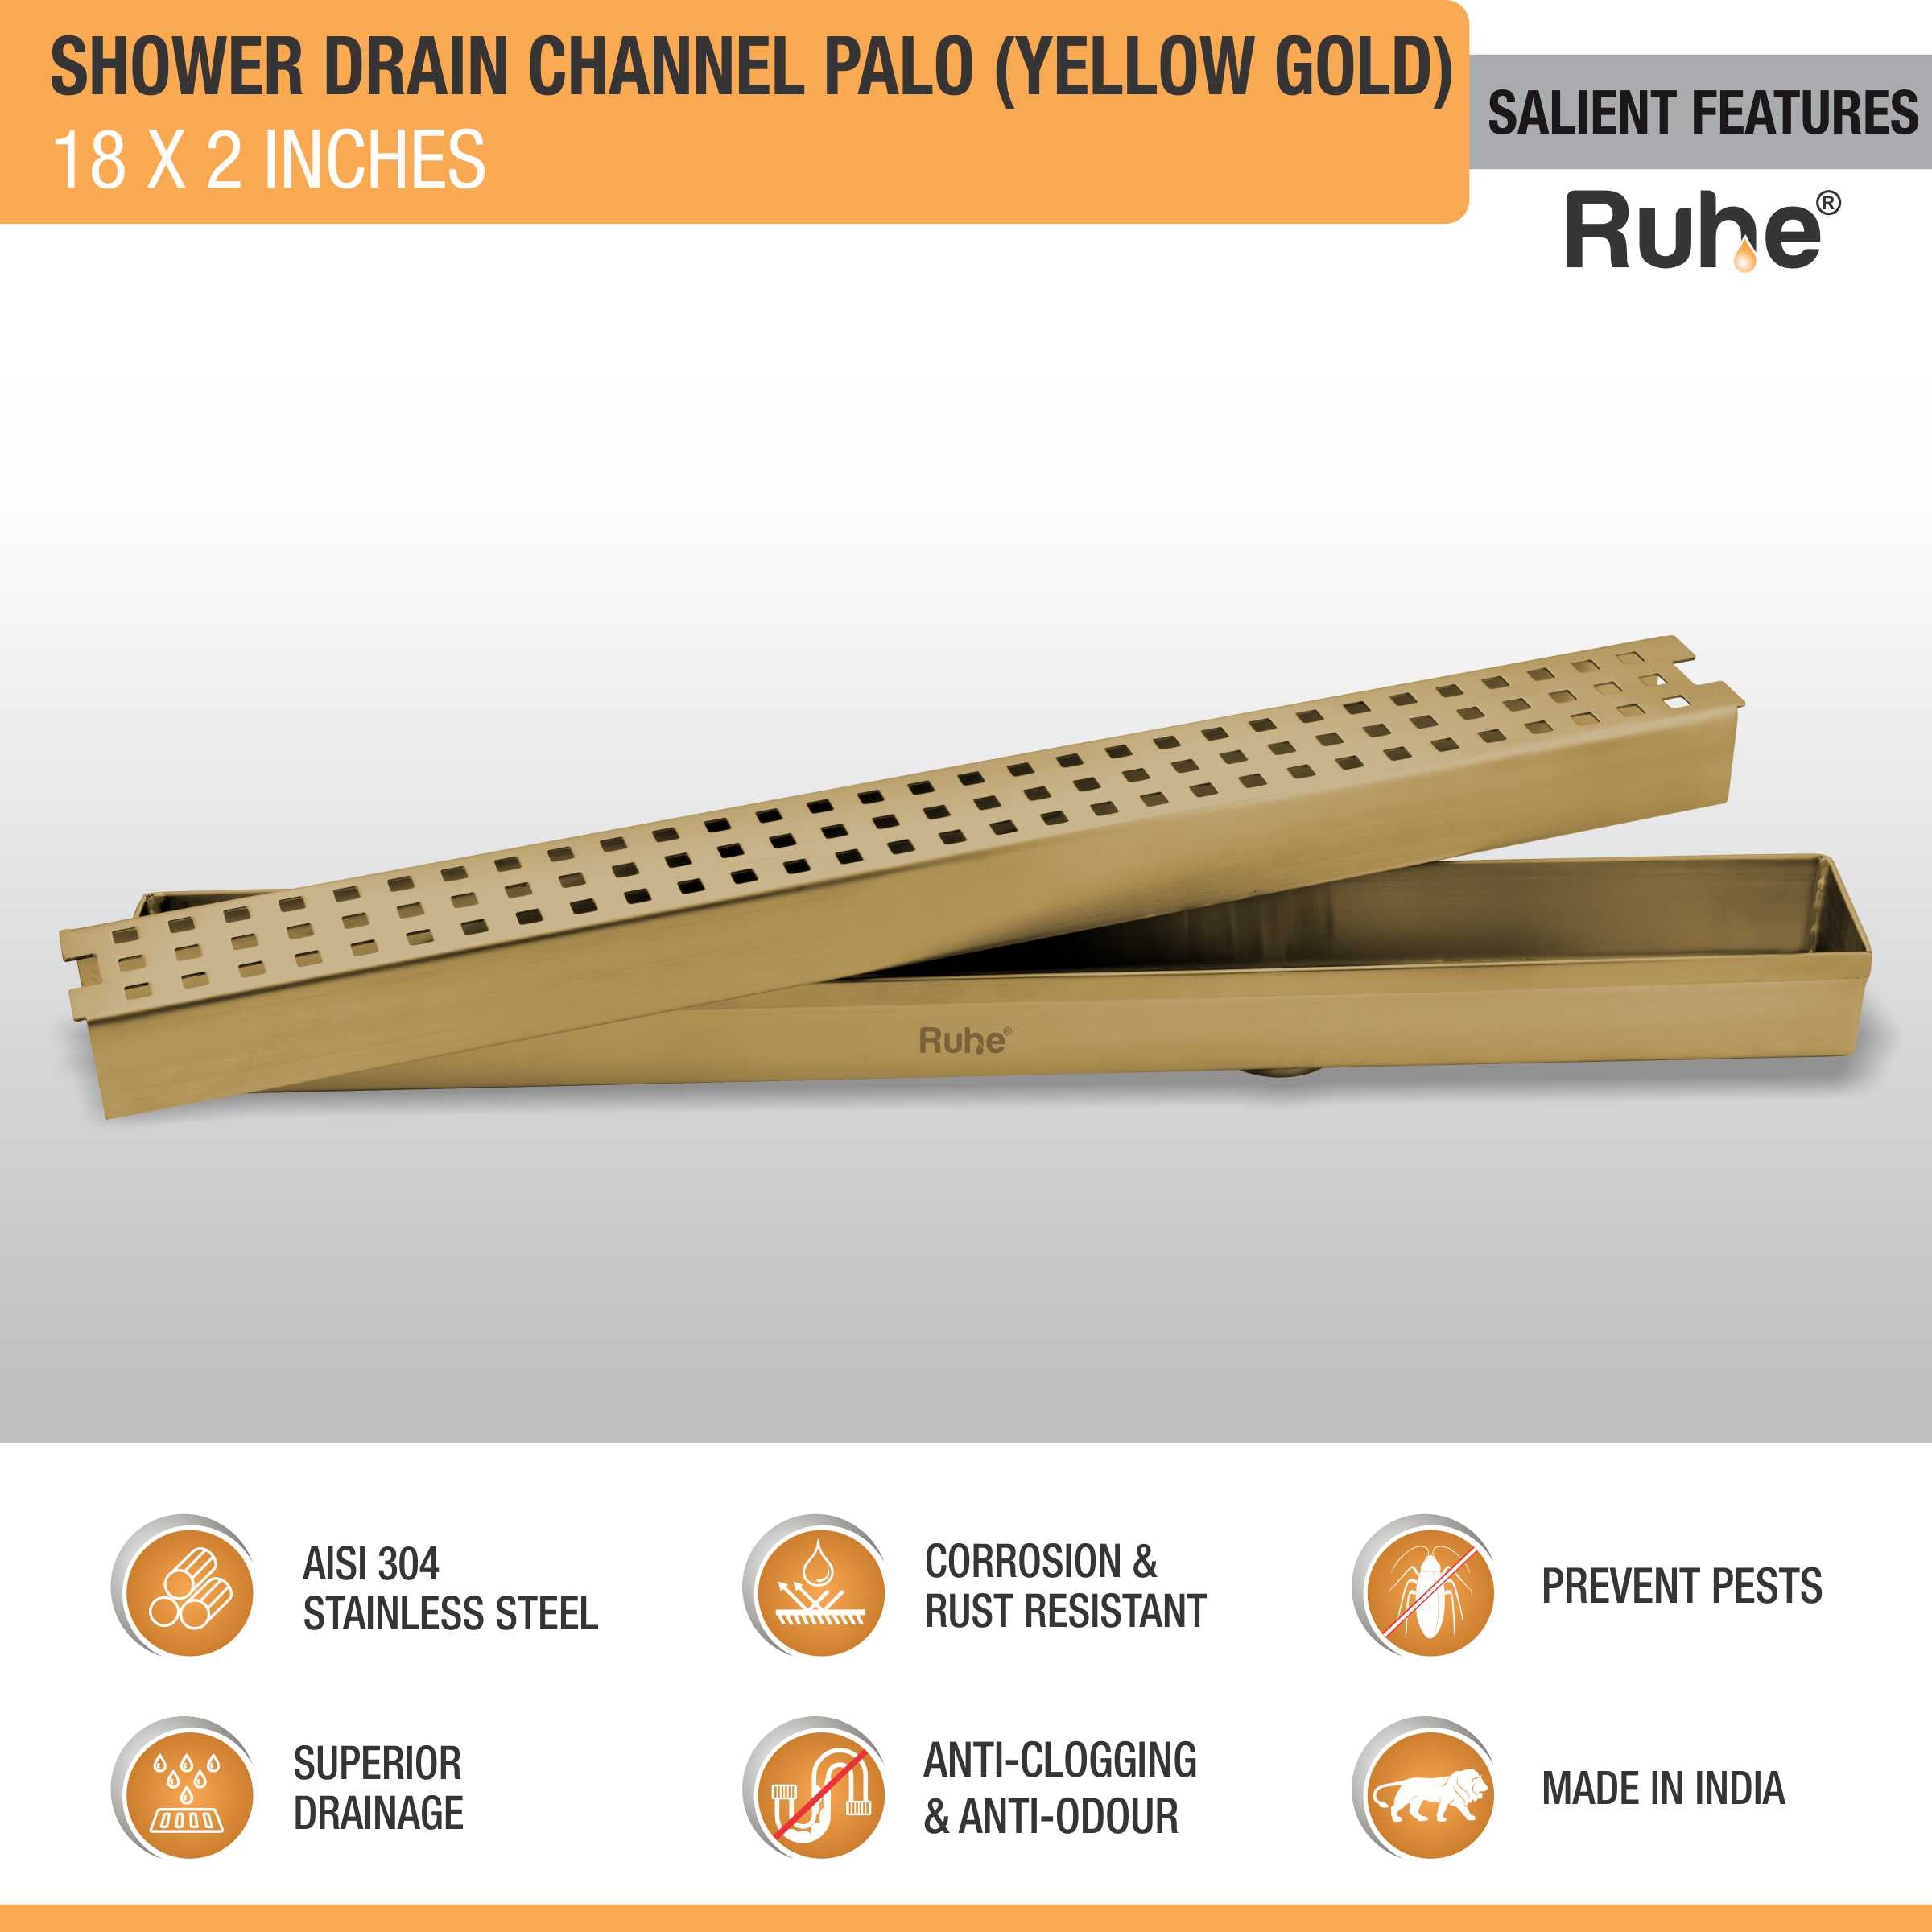 Palo Shower Drain Channel (18 x 2 Inches) YELLOW GOLD features